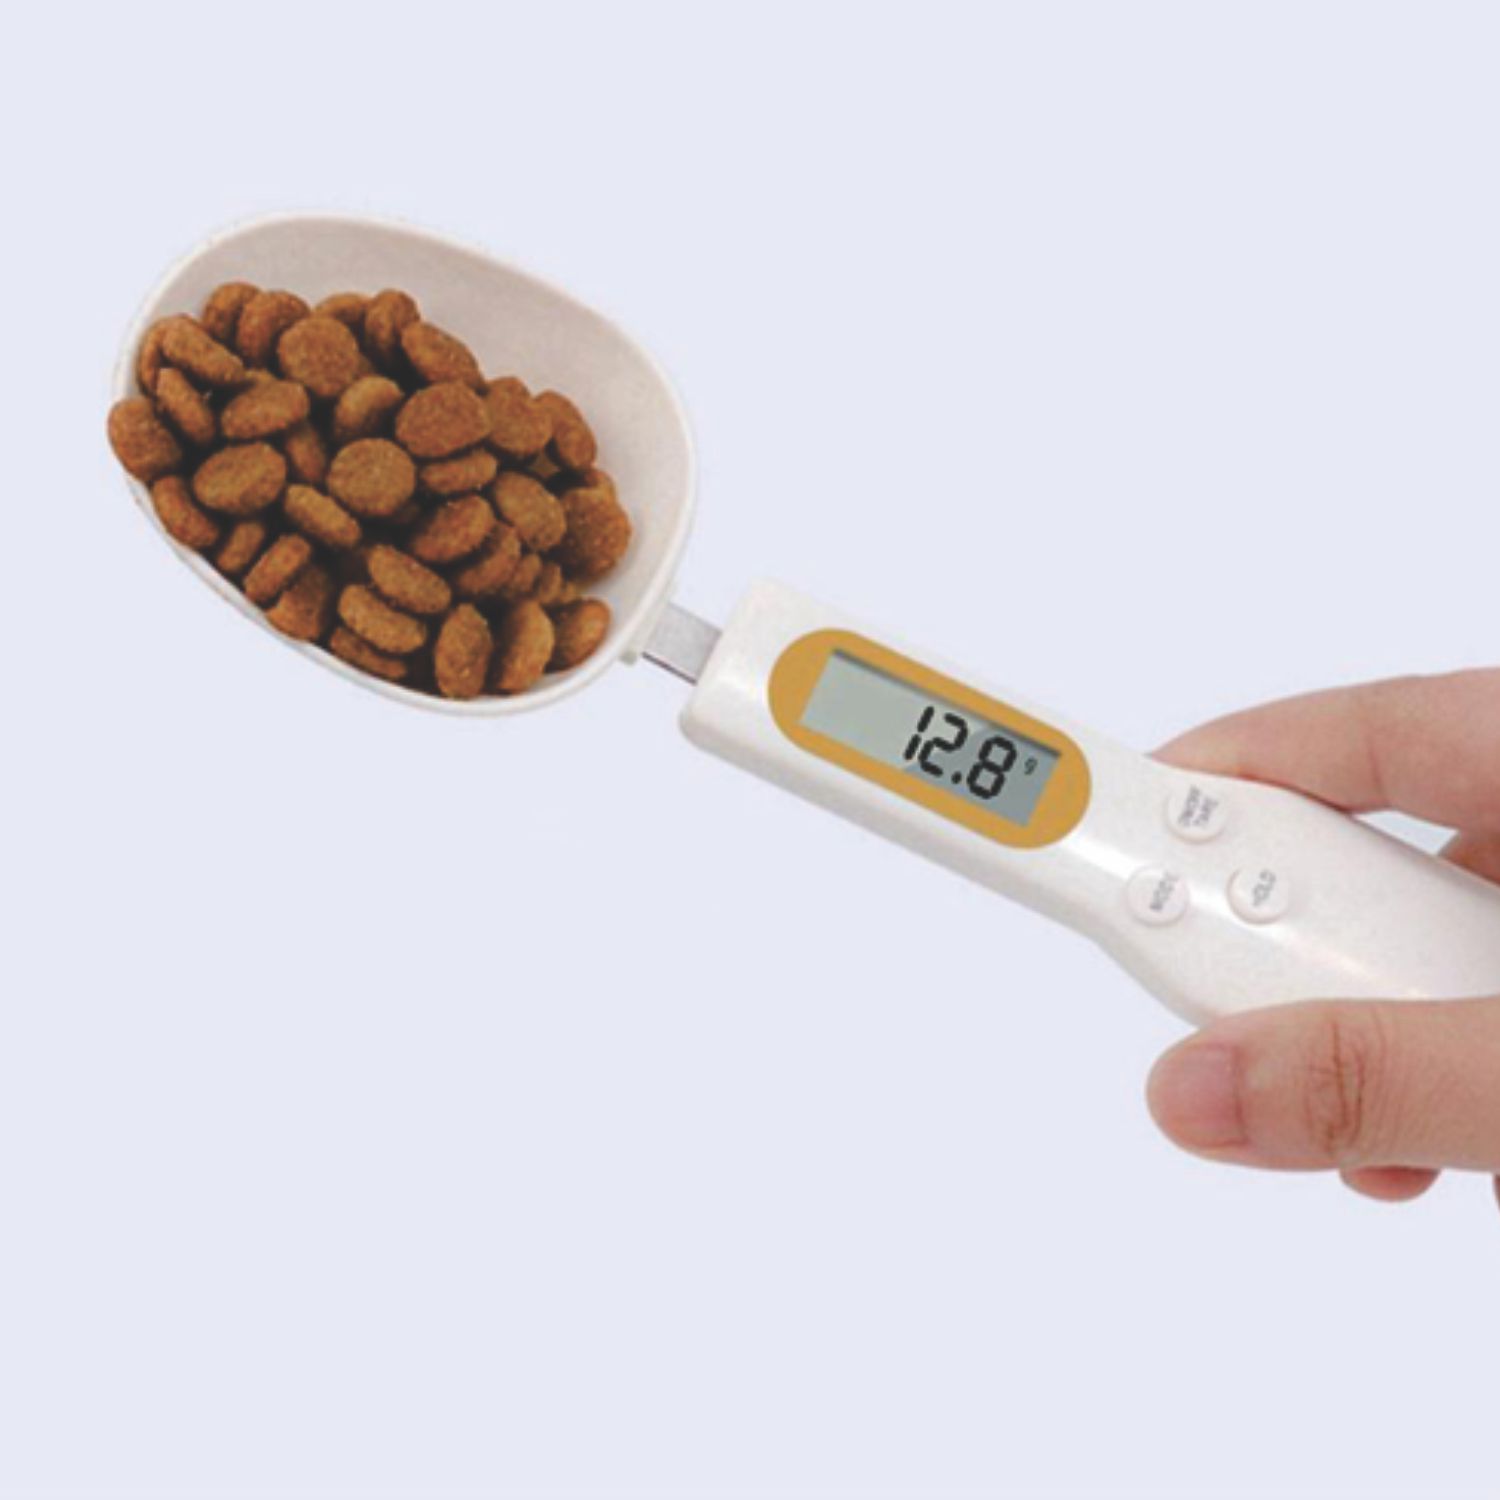 Electronic Measuring Spoon Adjustable Digital Spoon Scale Weigh up 1-500g  Digital Kitchen Spoons Large LCD Display Measurements Ounces Grams Karats